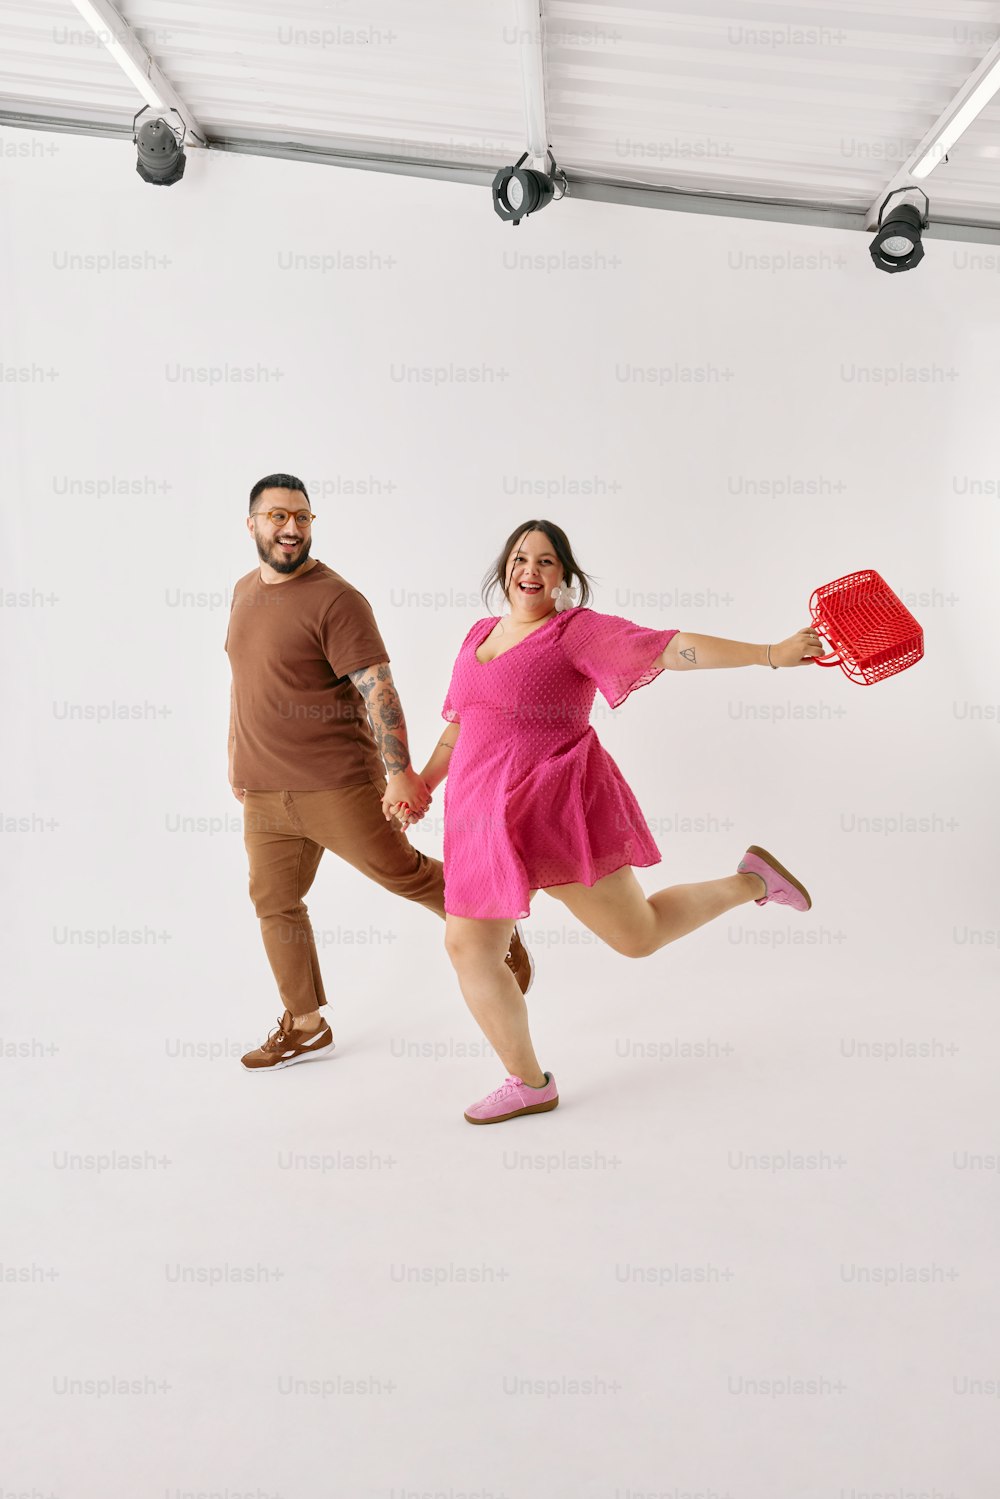 a man and a woman holding a red frisbee